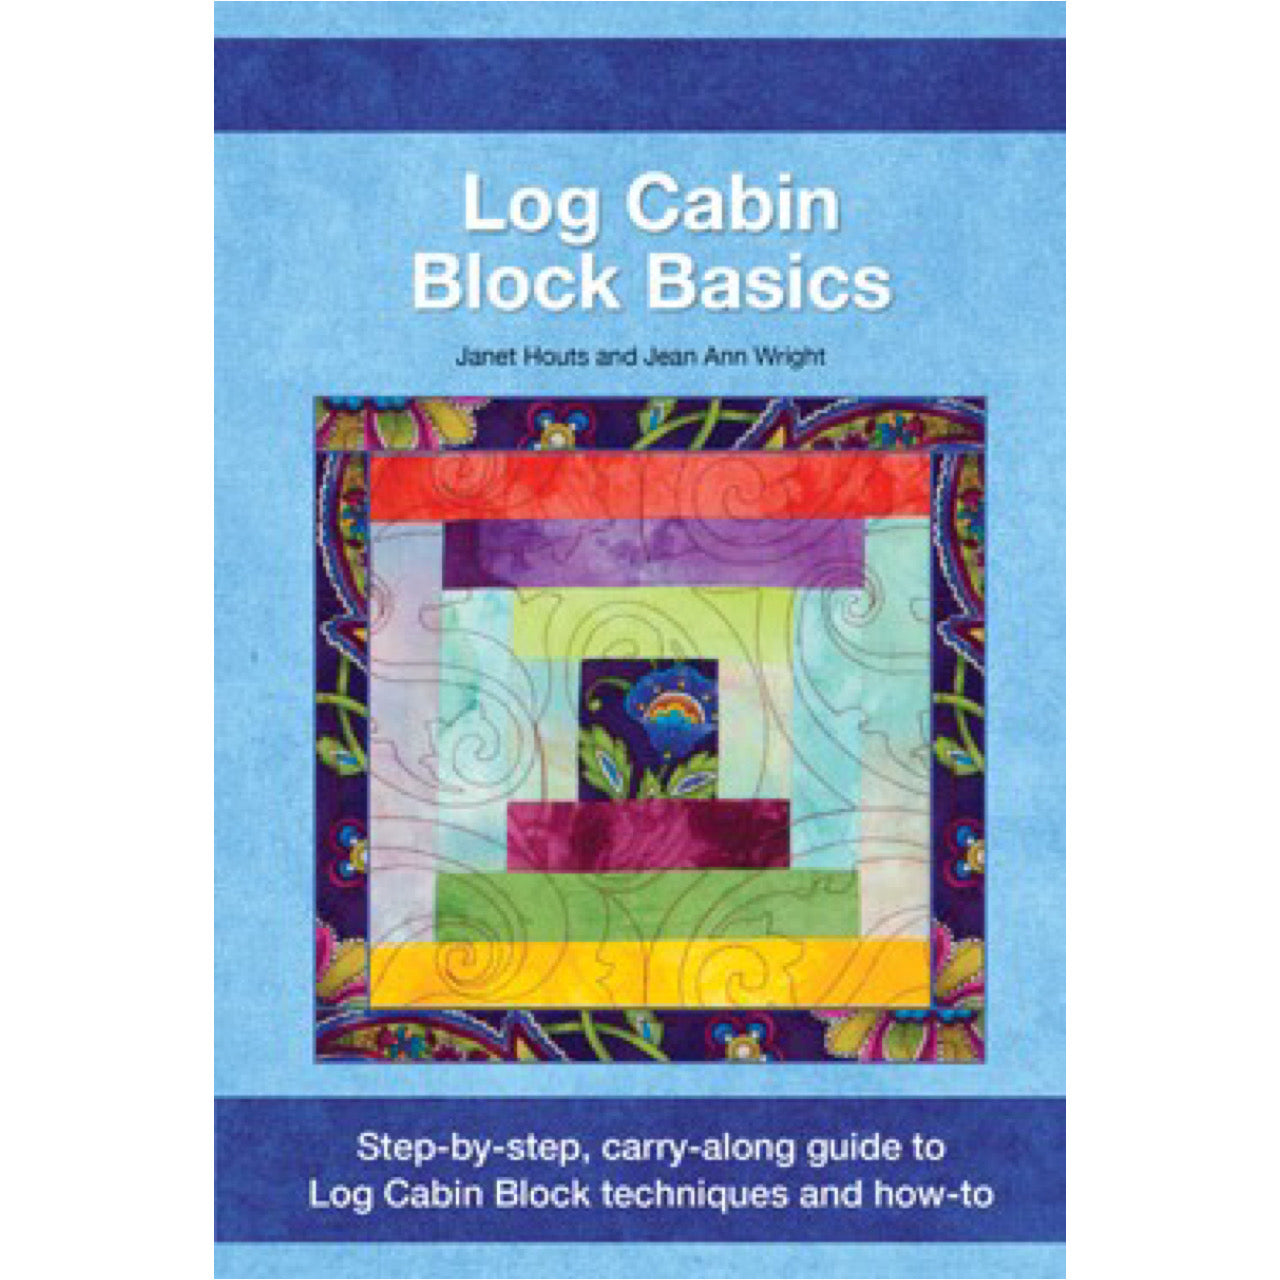 Carry-Along Guide - Log Cabin Block Basics by Janet Houts and Jean Ann Wright